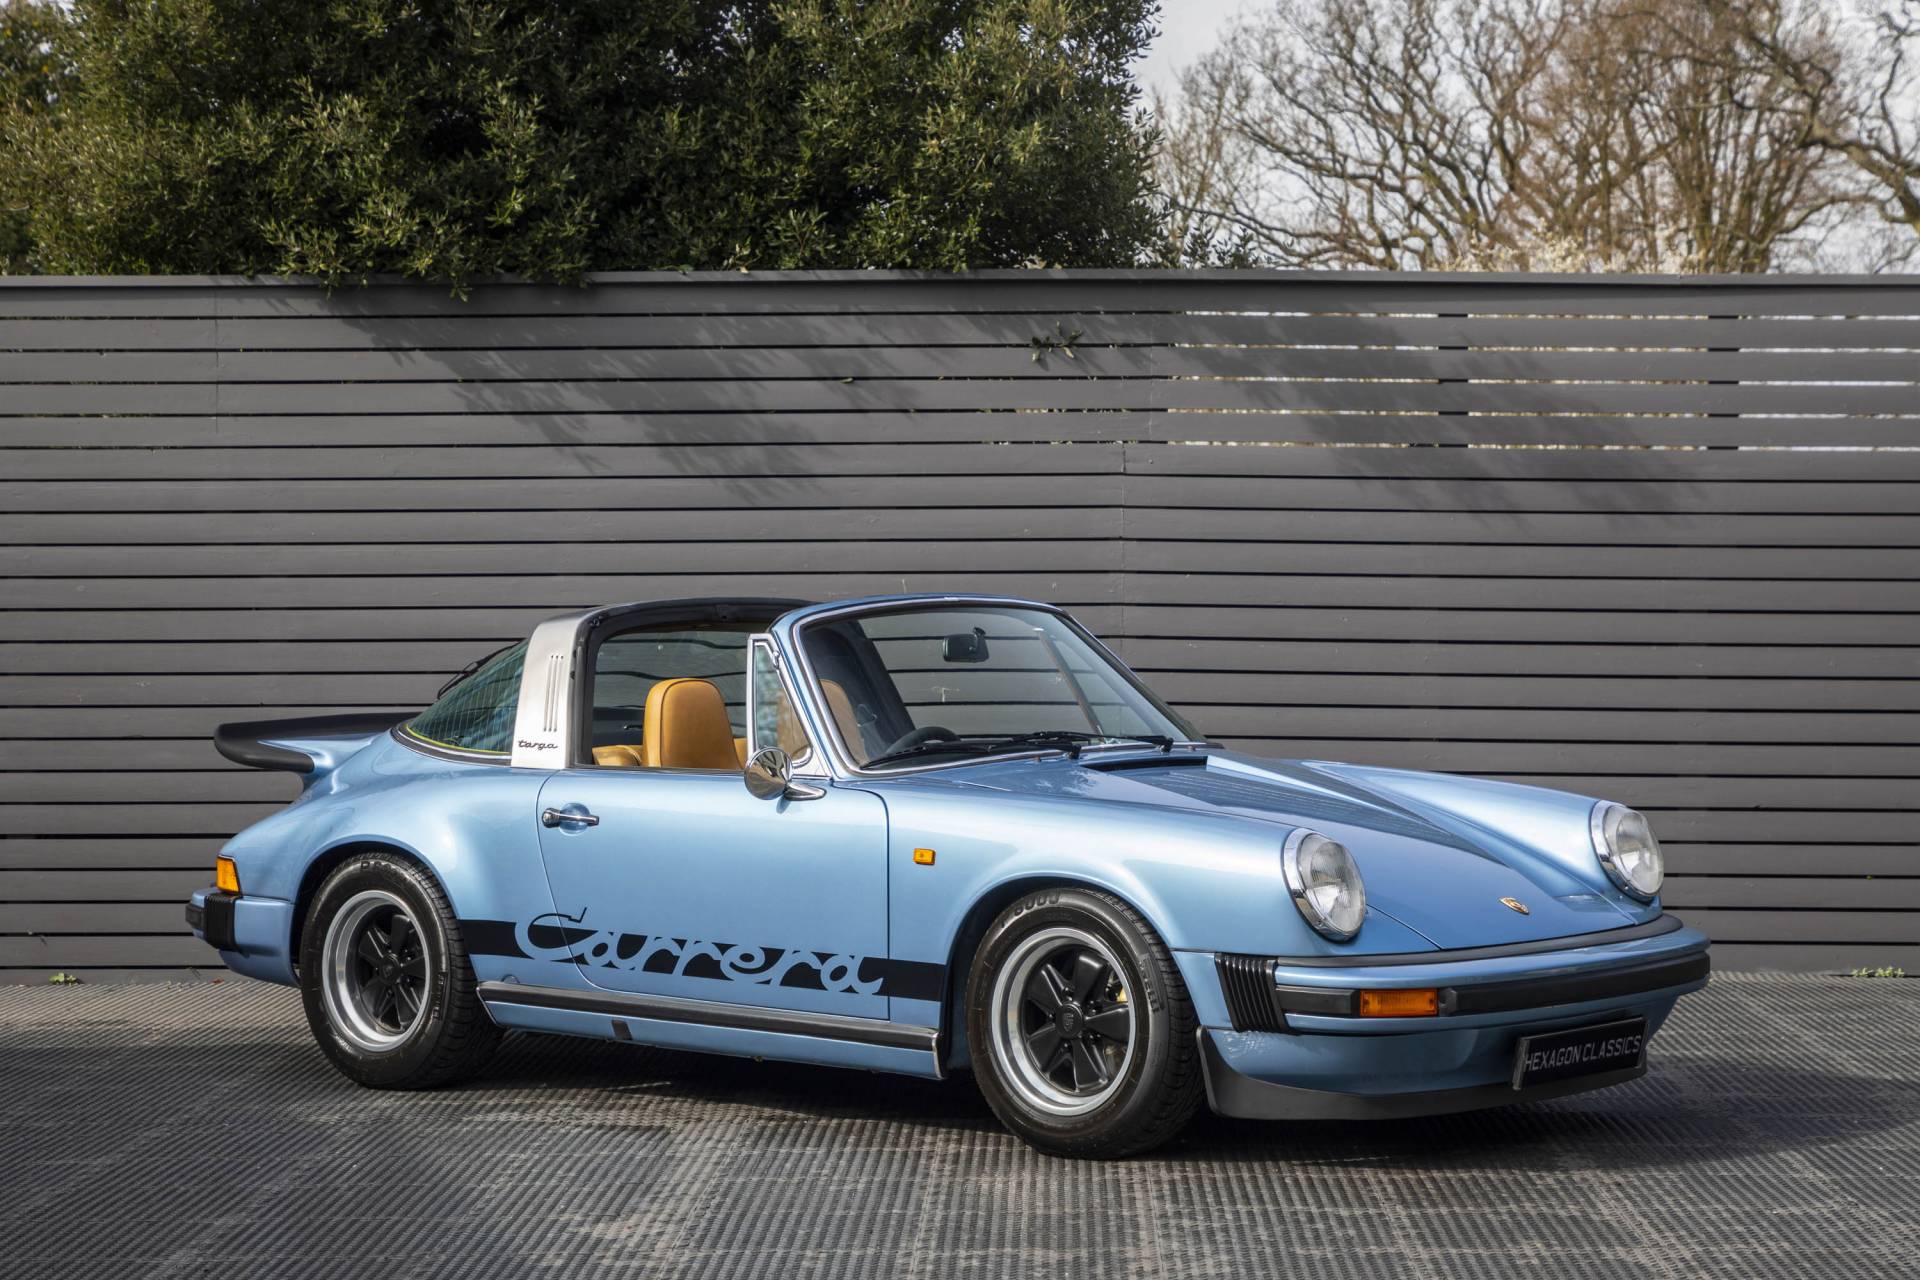 For Sale: Porsche 911  (1974) offered for GBP 199,995